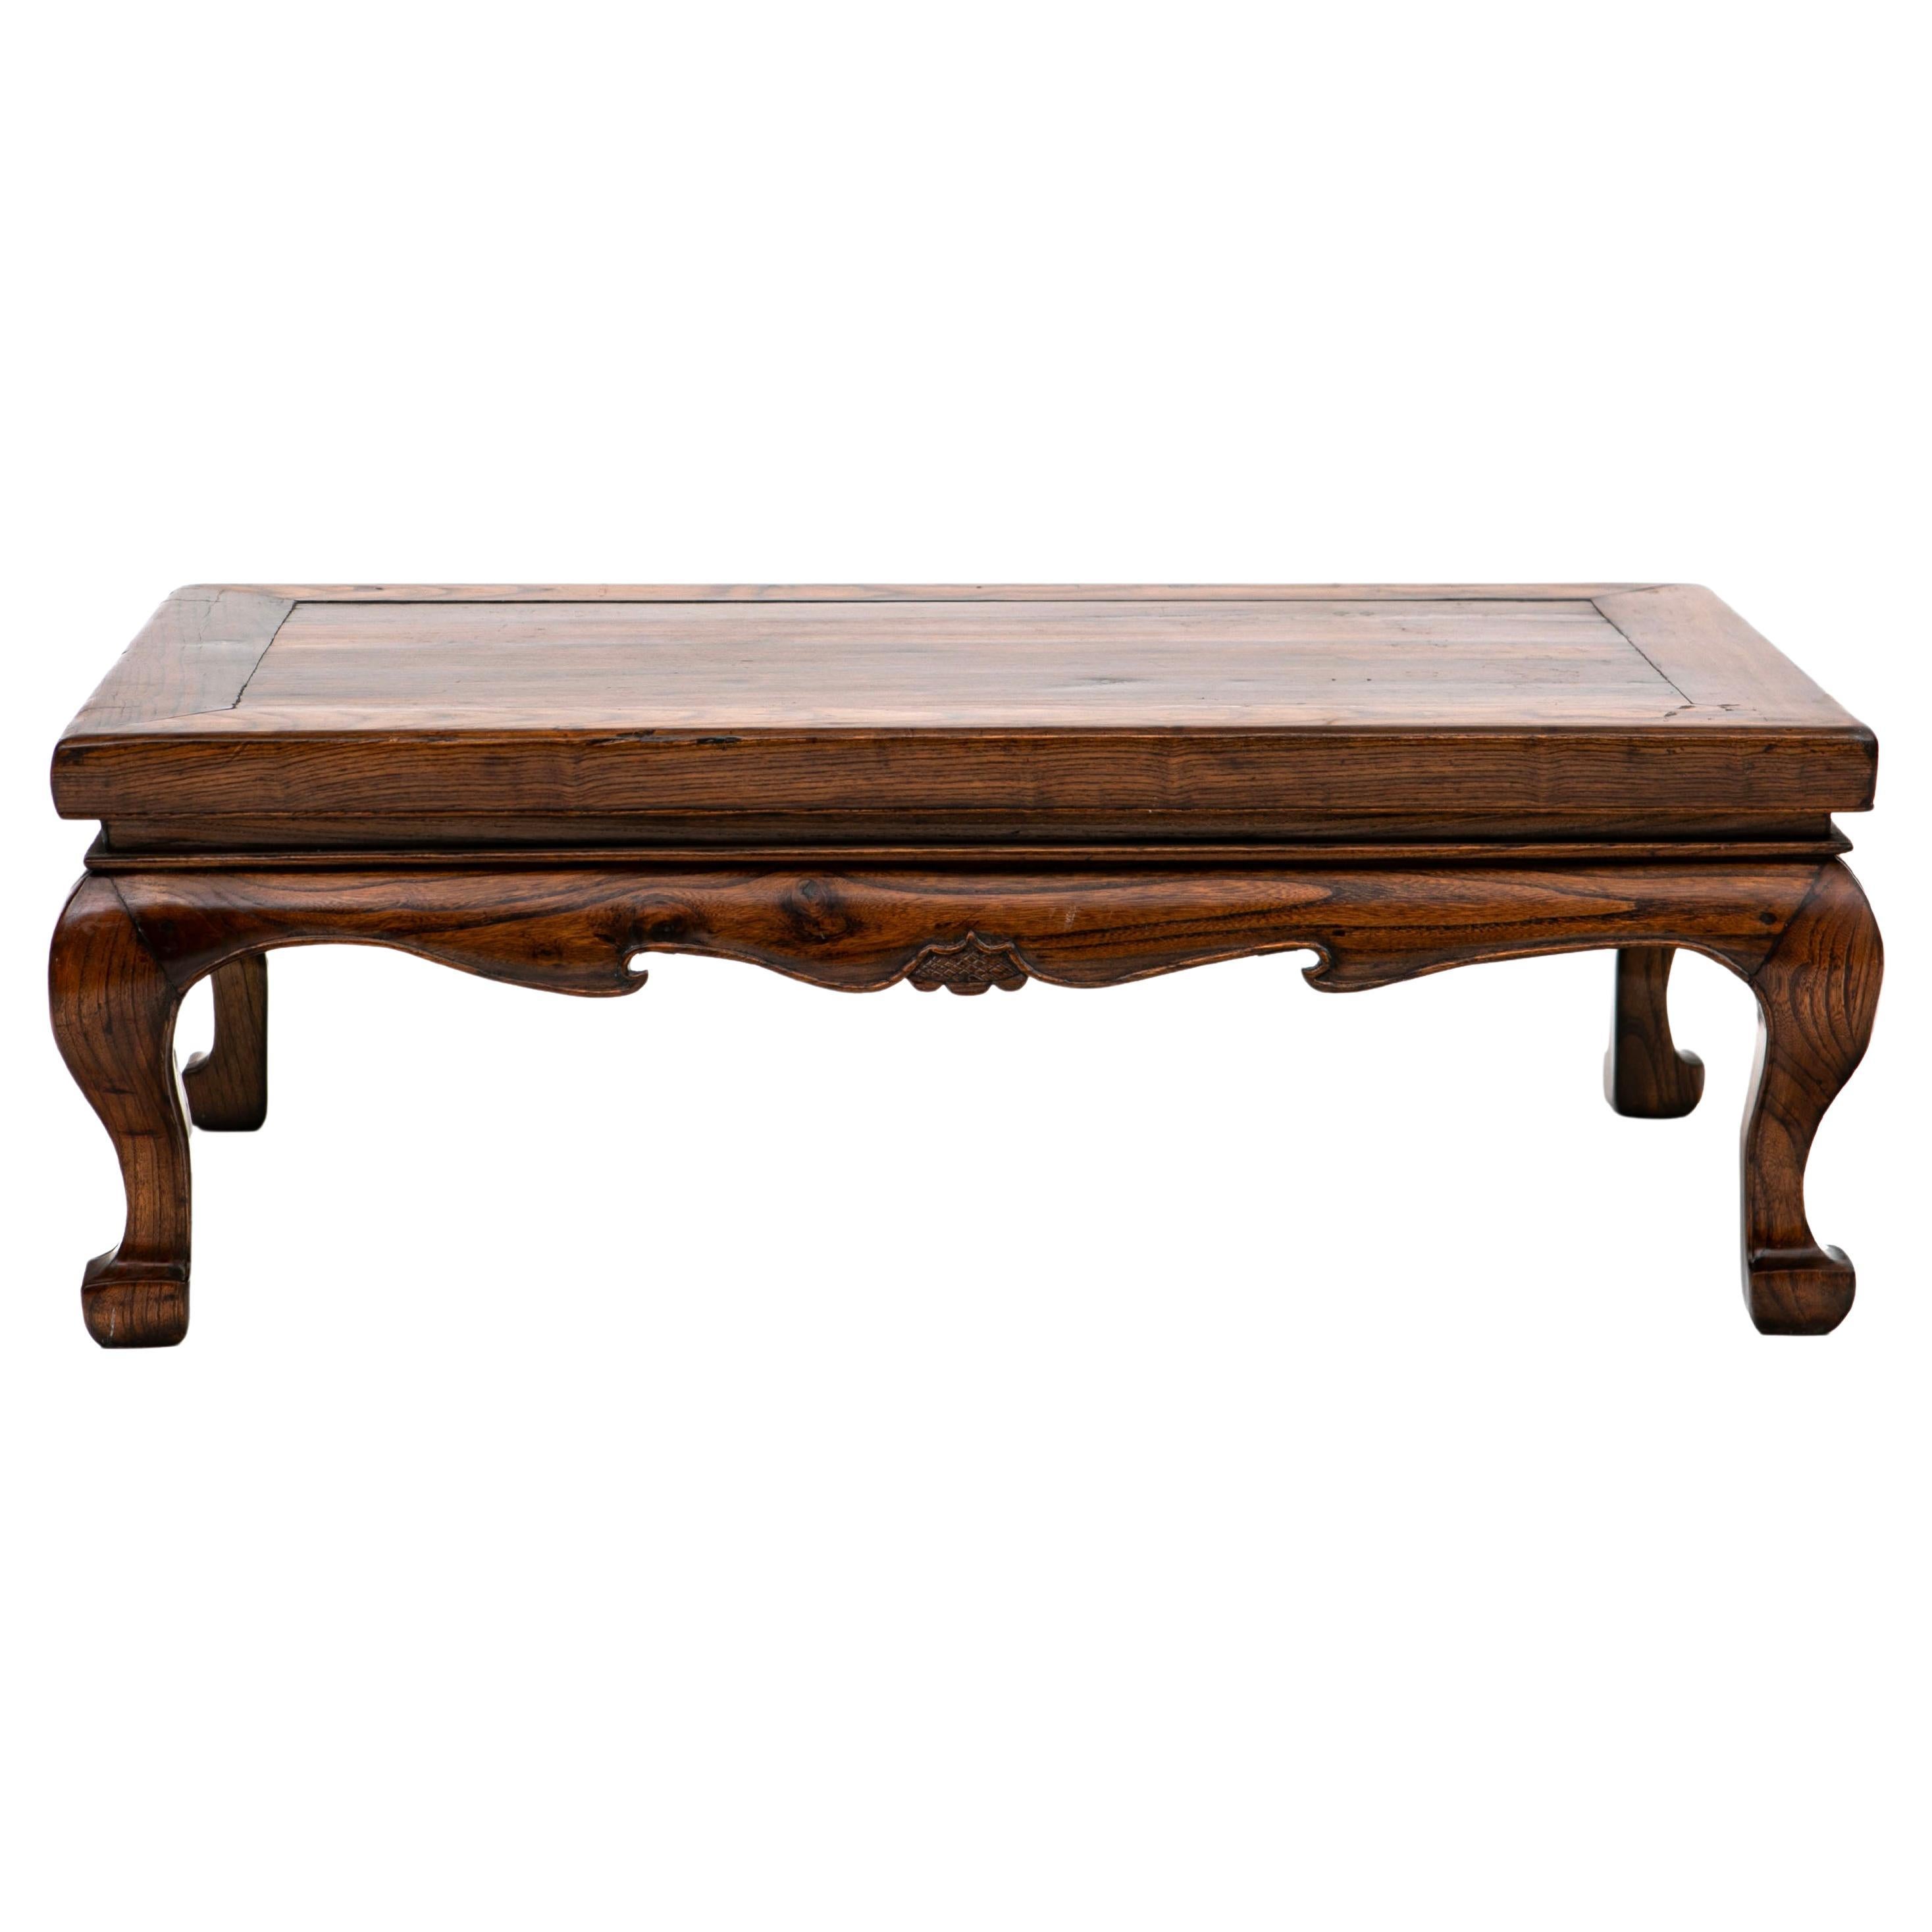 Chinese Mid 19th Century Qing Dynasty Kang Table For Sale